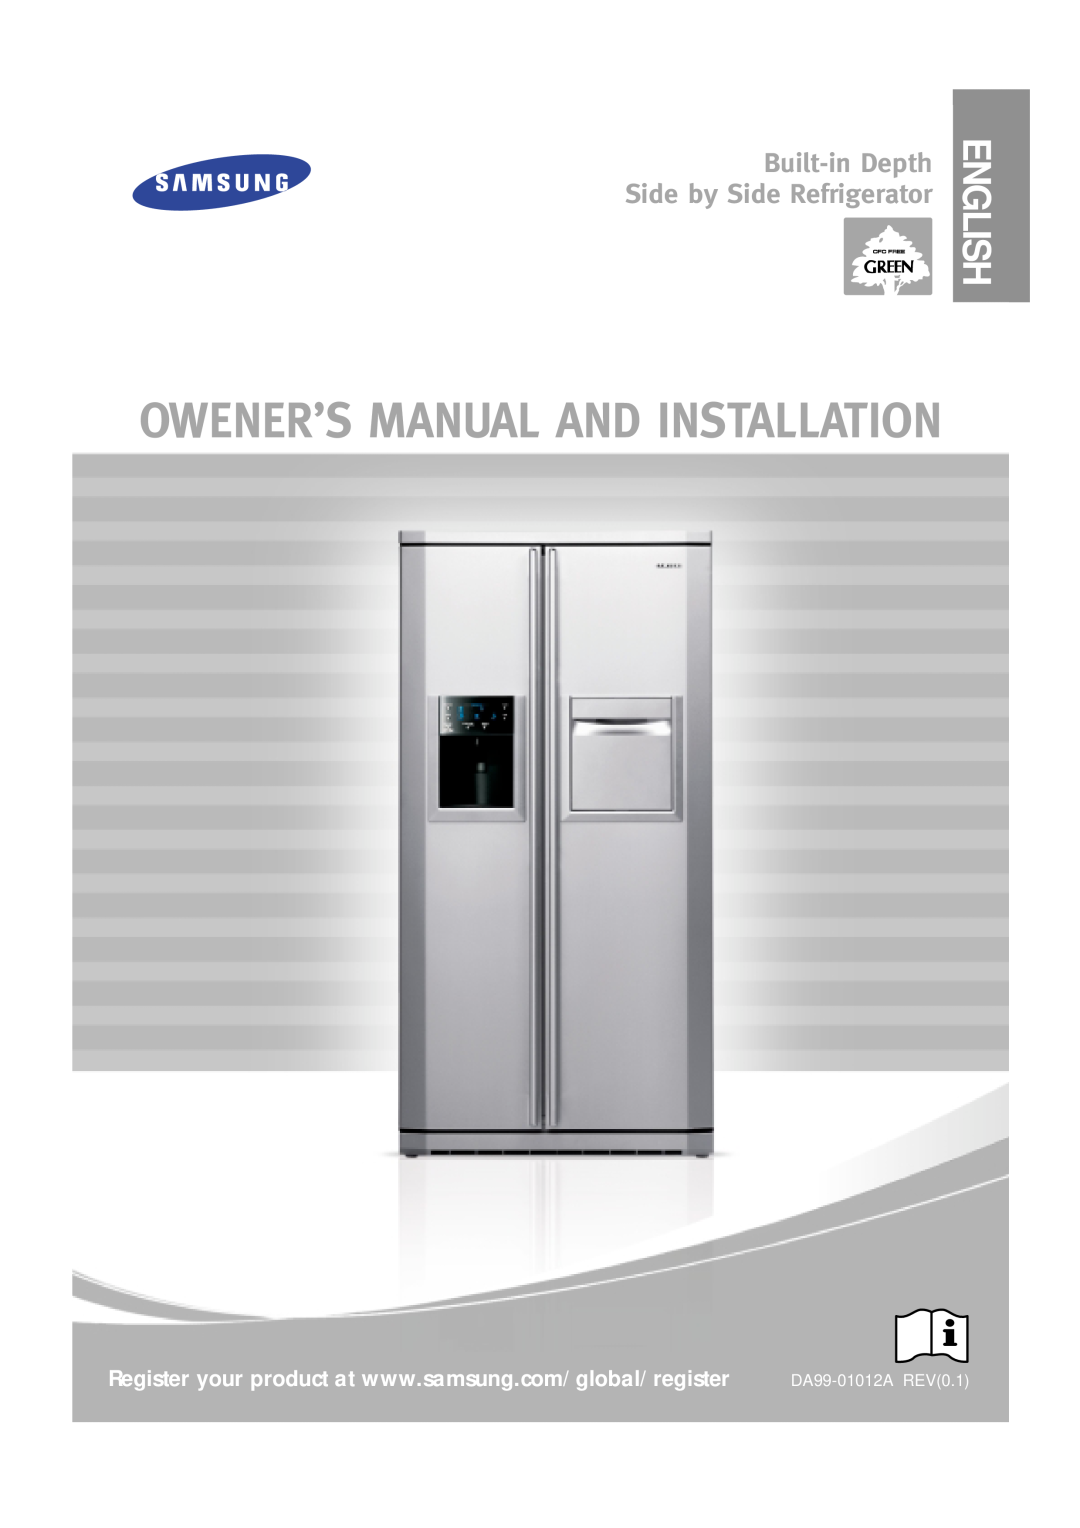 Samsung RSE8VPUS1/XET manual English, Owener’S Manual And Installation, Built-in Depth Side by Side Refrigerator 